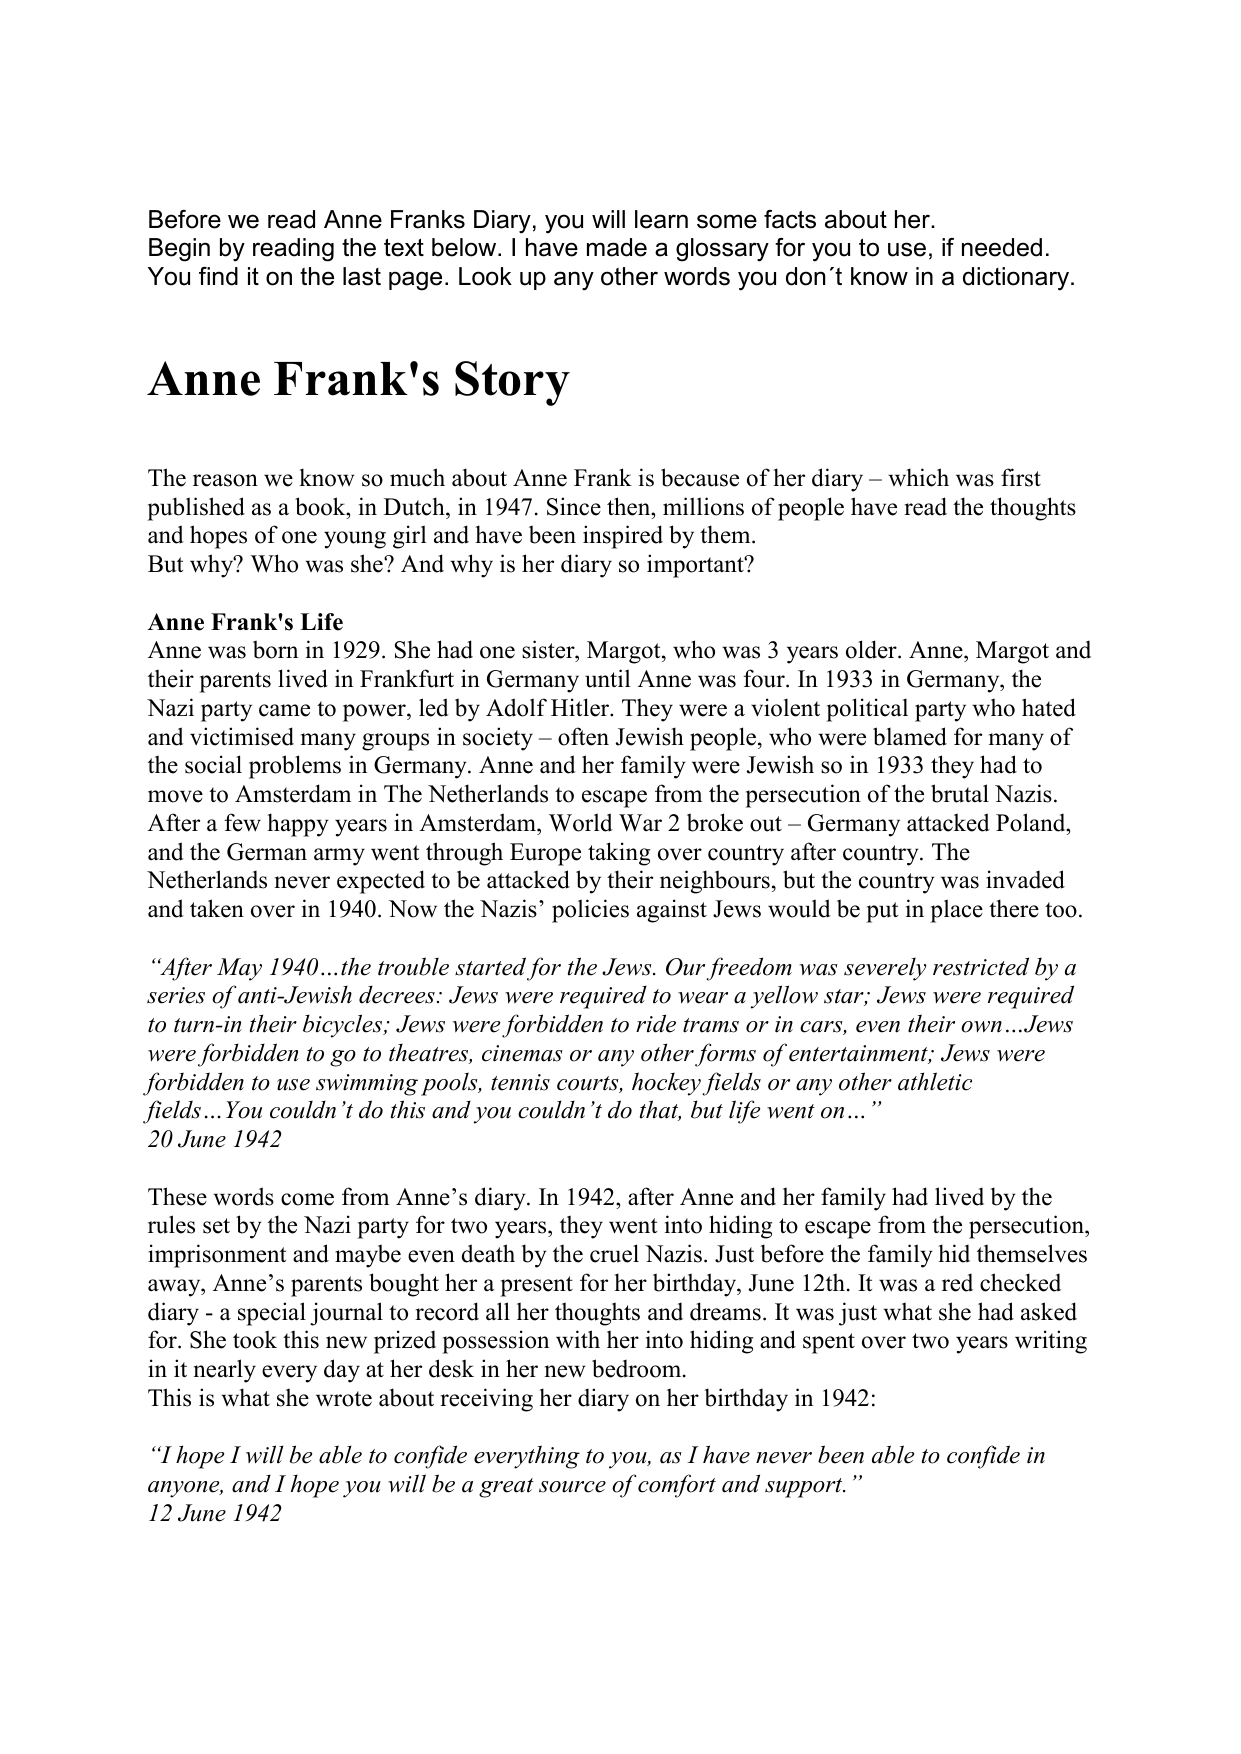 thesis statement for anne frank